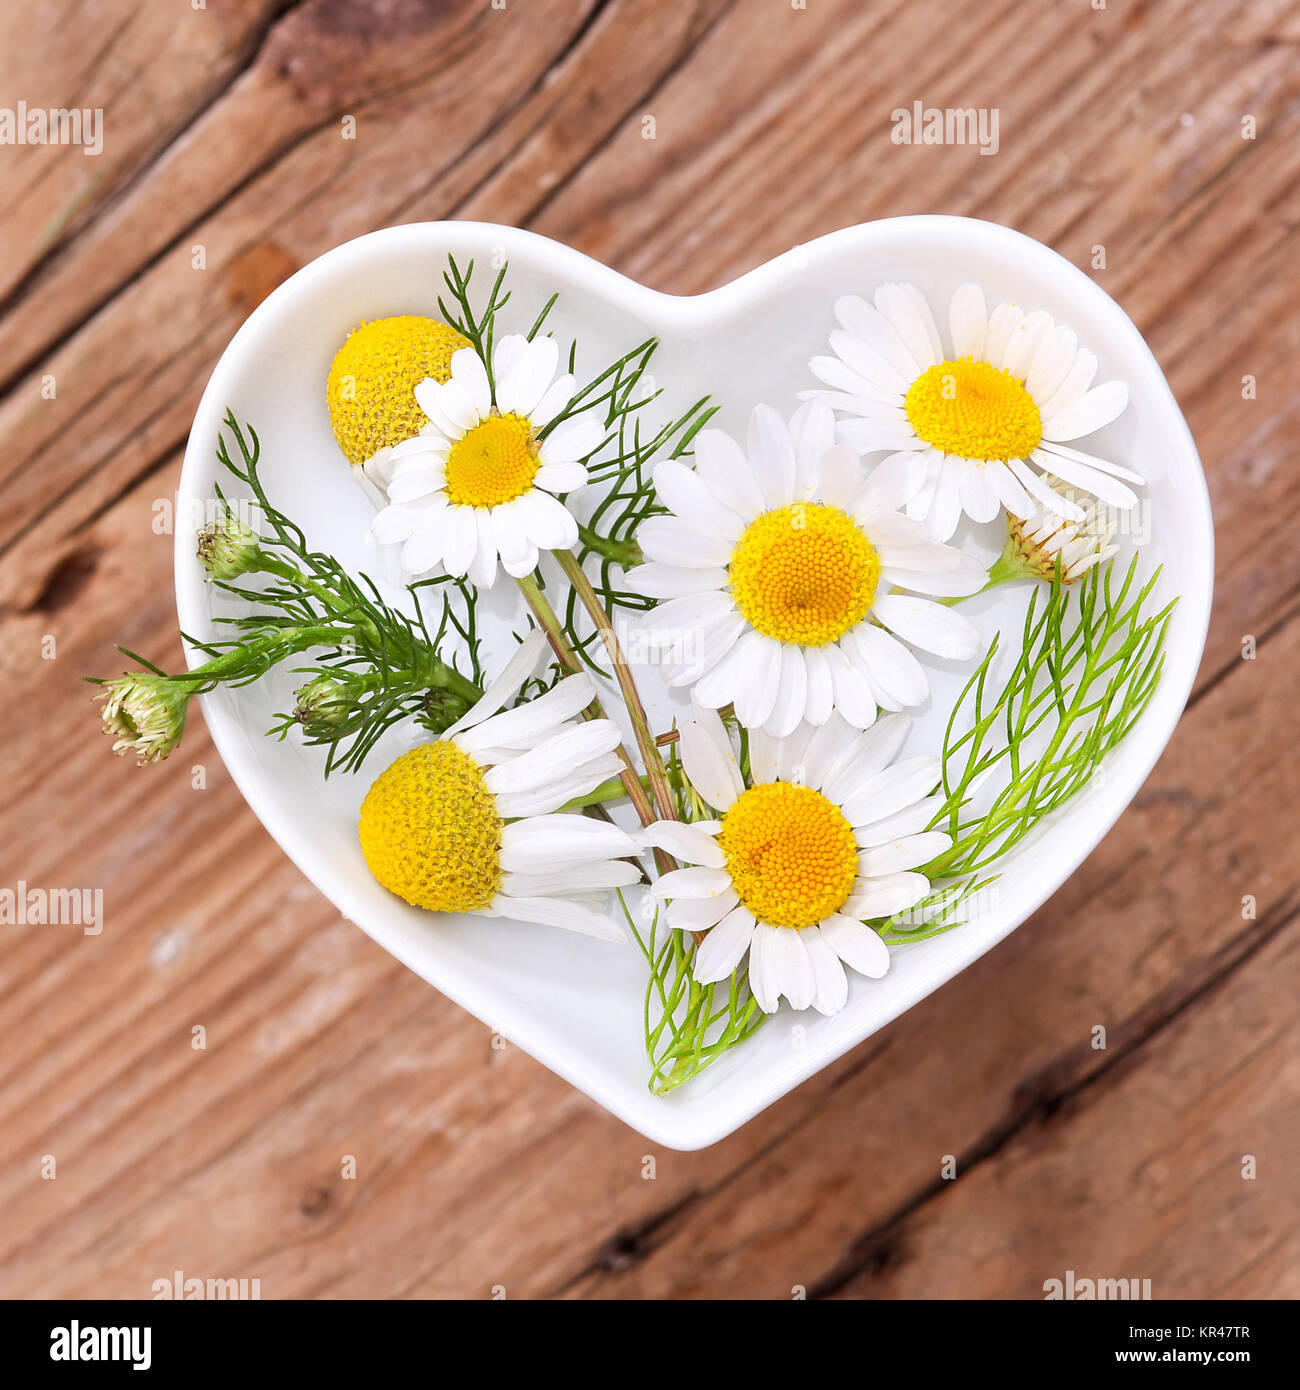 homeopathy and cooking with herbs,camomile Stock Photo